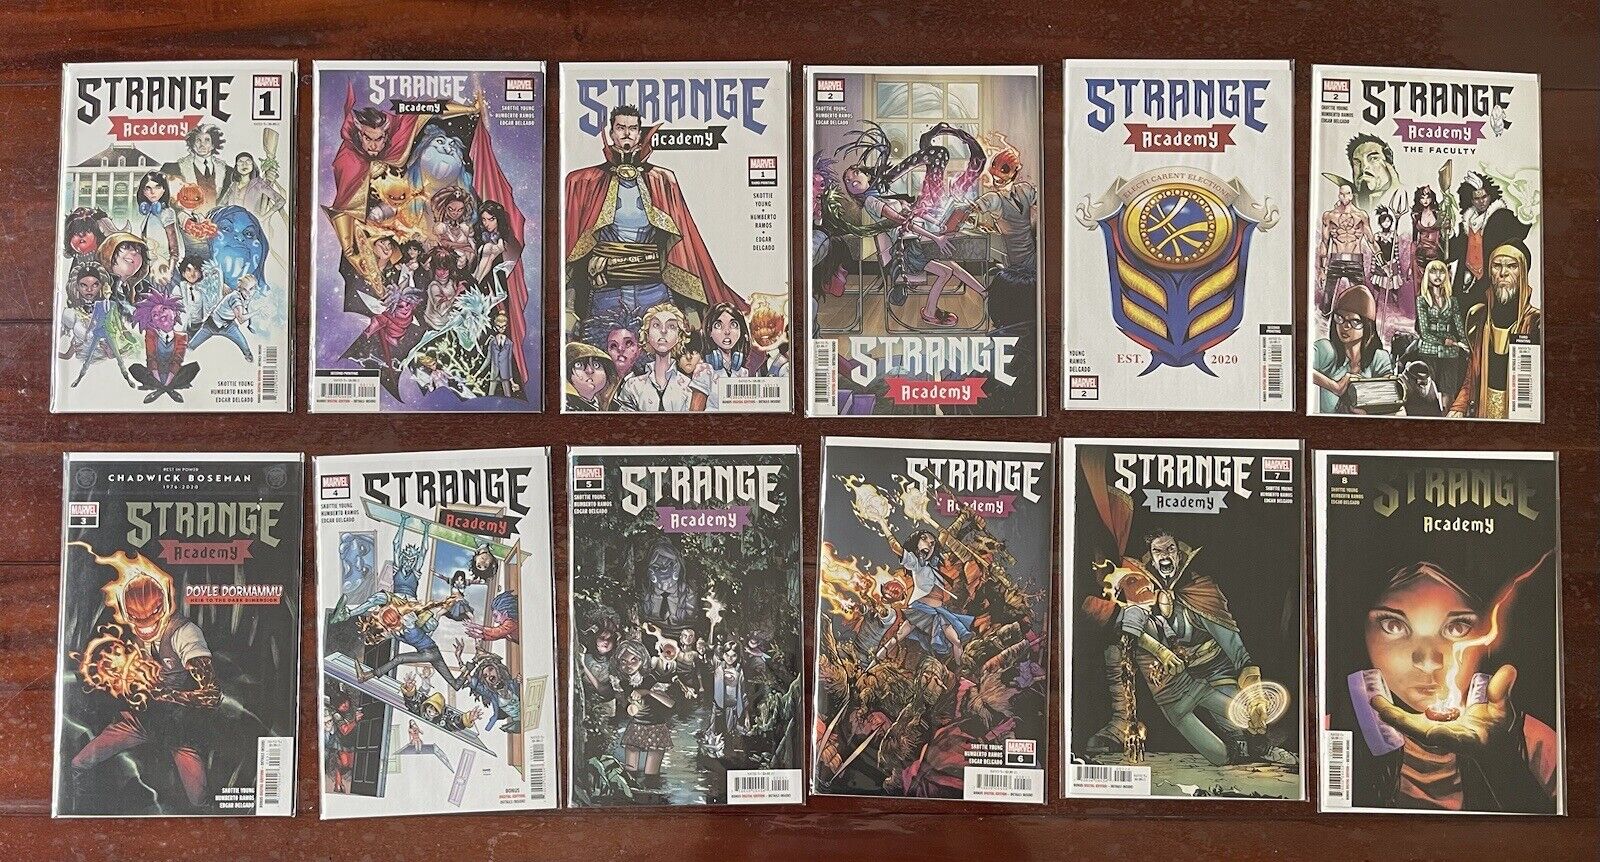 Strange Academy #1-8 With Several Variants - Please See Photo - Marvel Comics